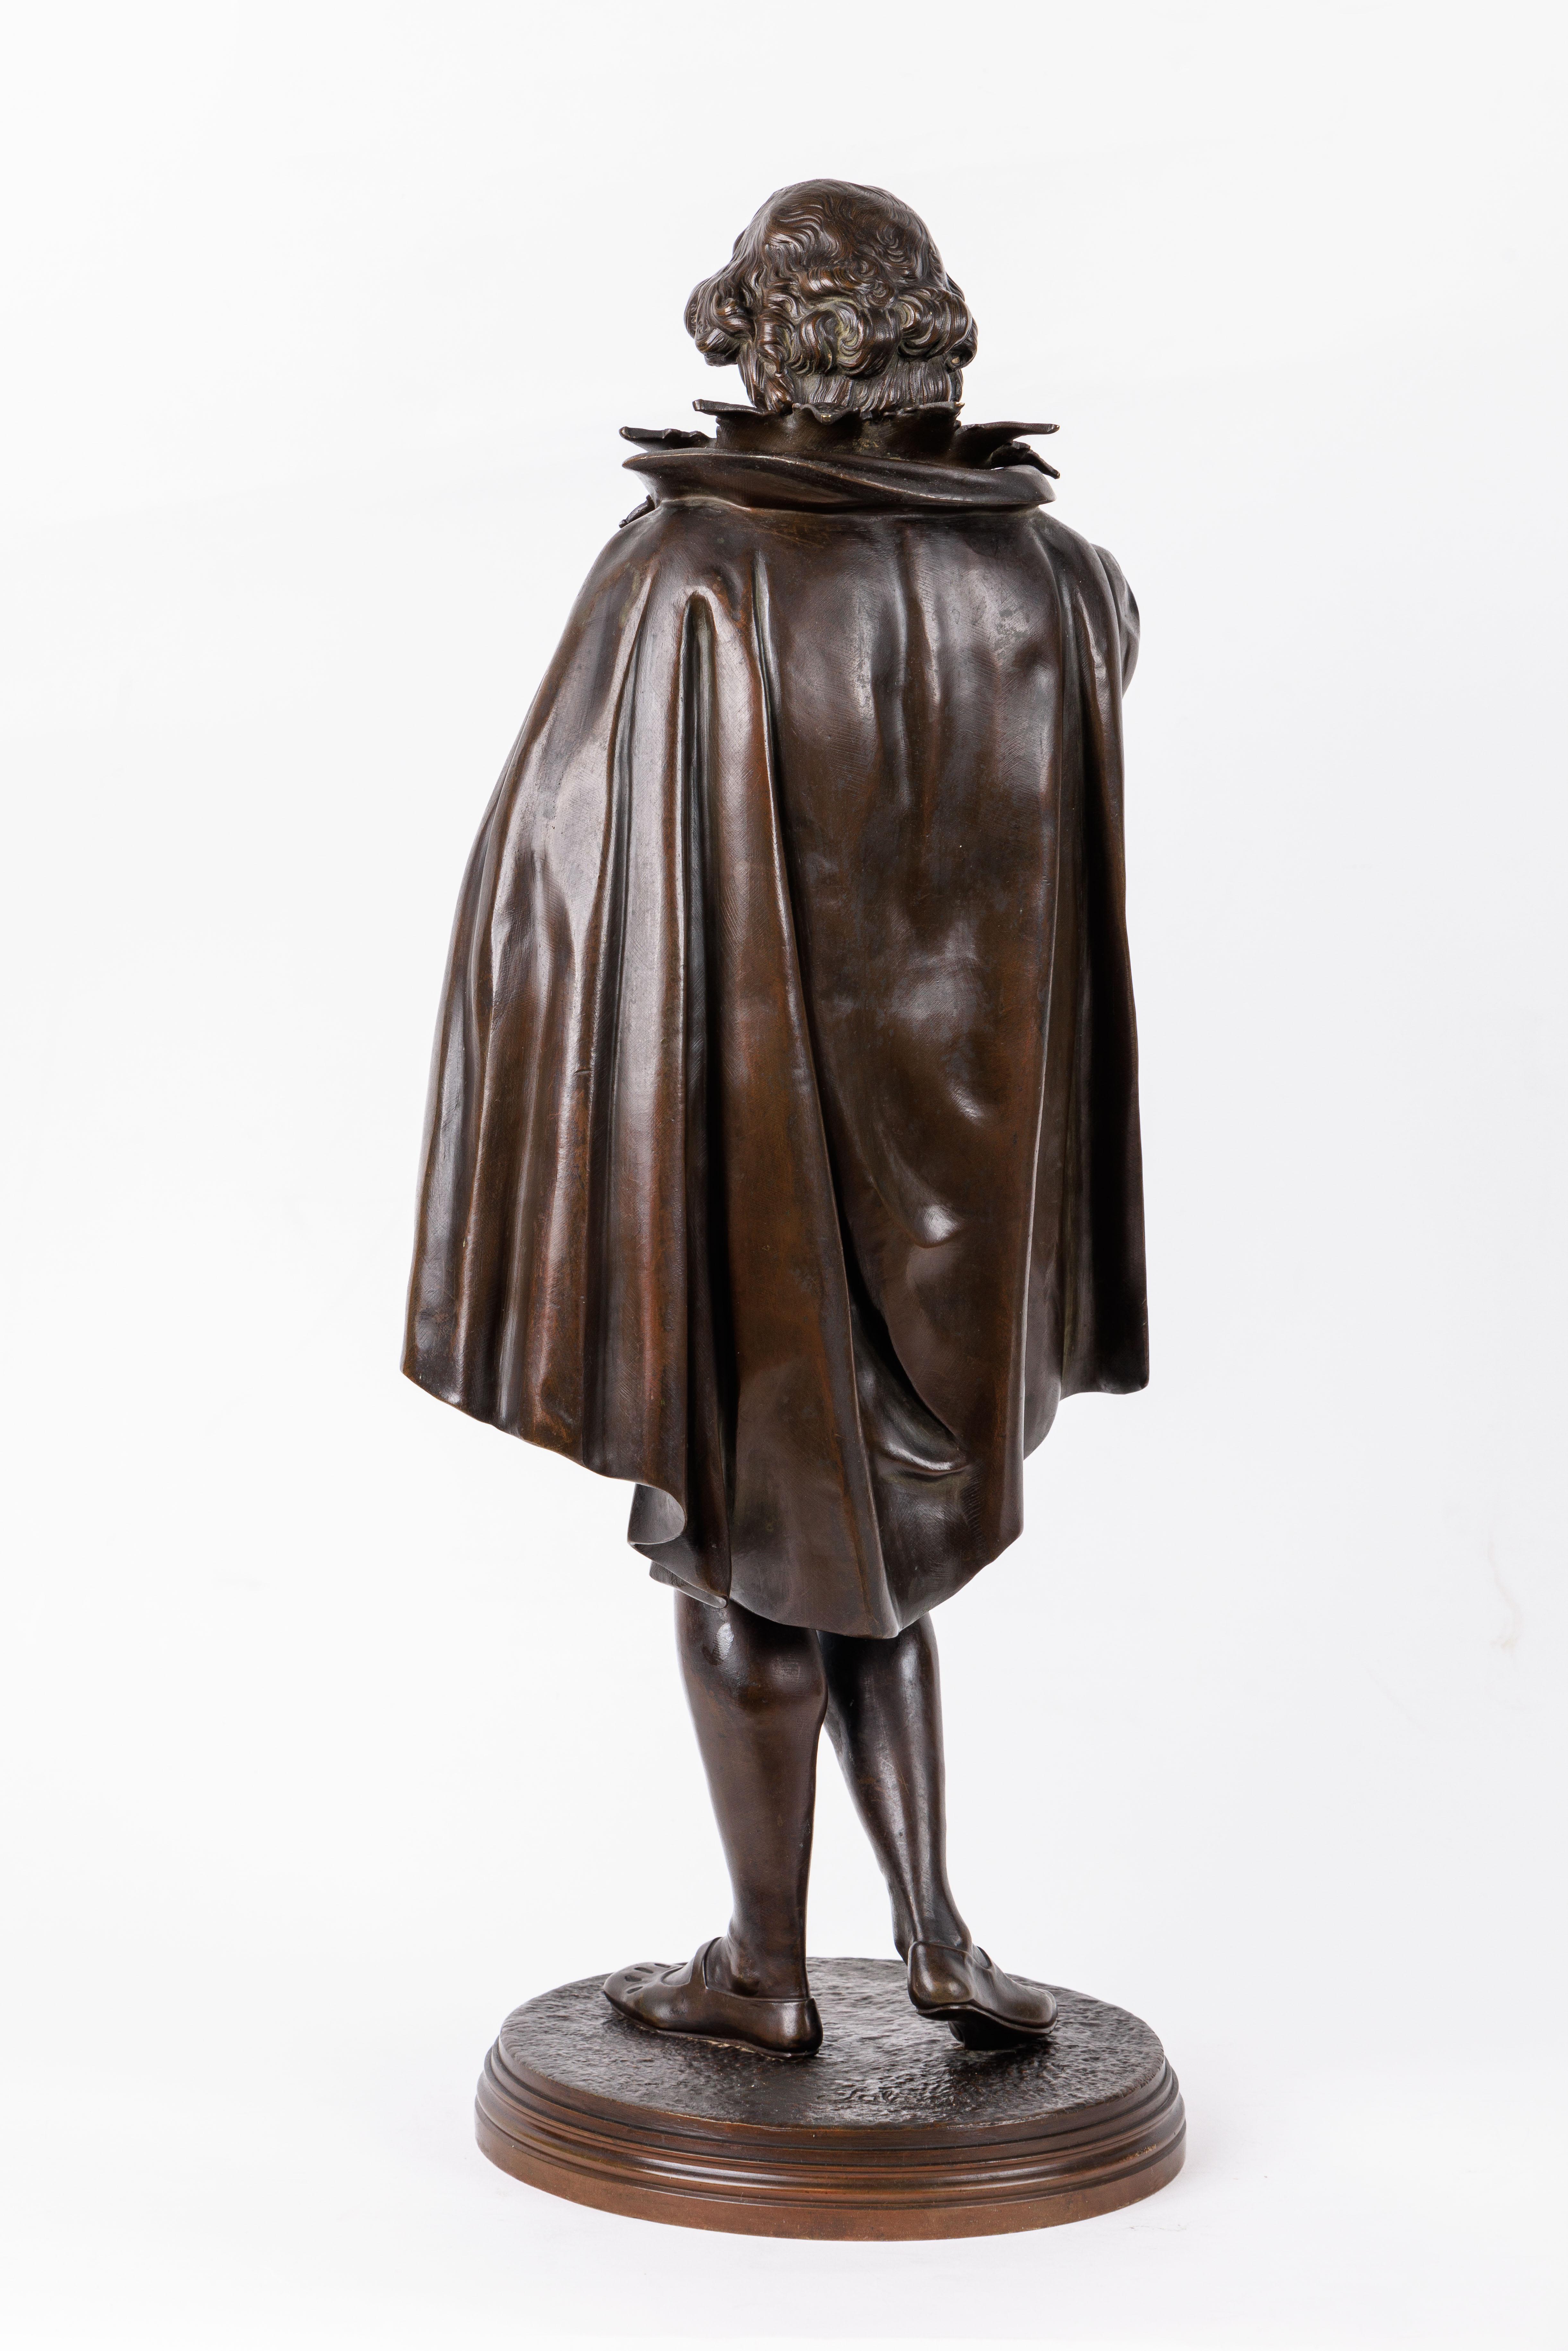 Jean Jules B. Salmson, A Patinated Bronze Sculpture of William Shakespeare For Sale 1